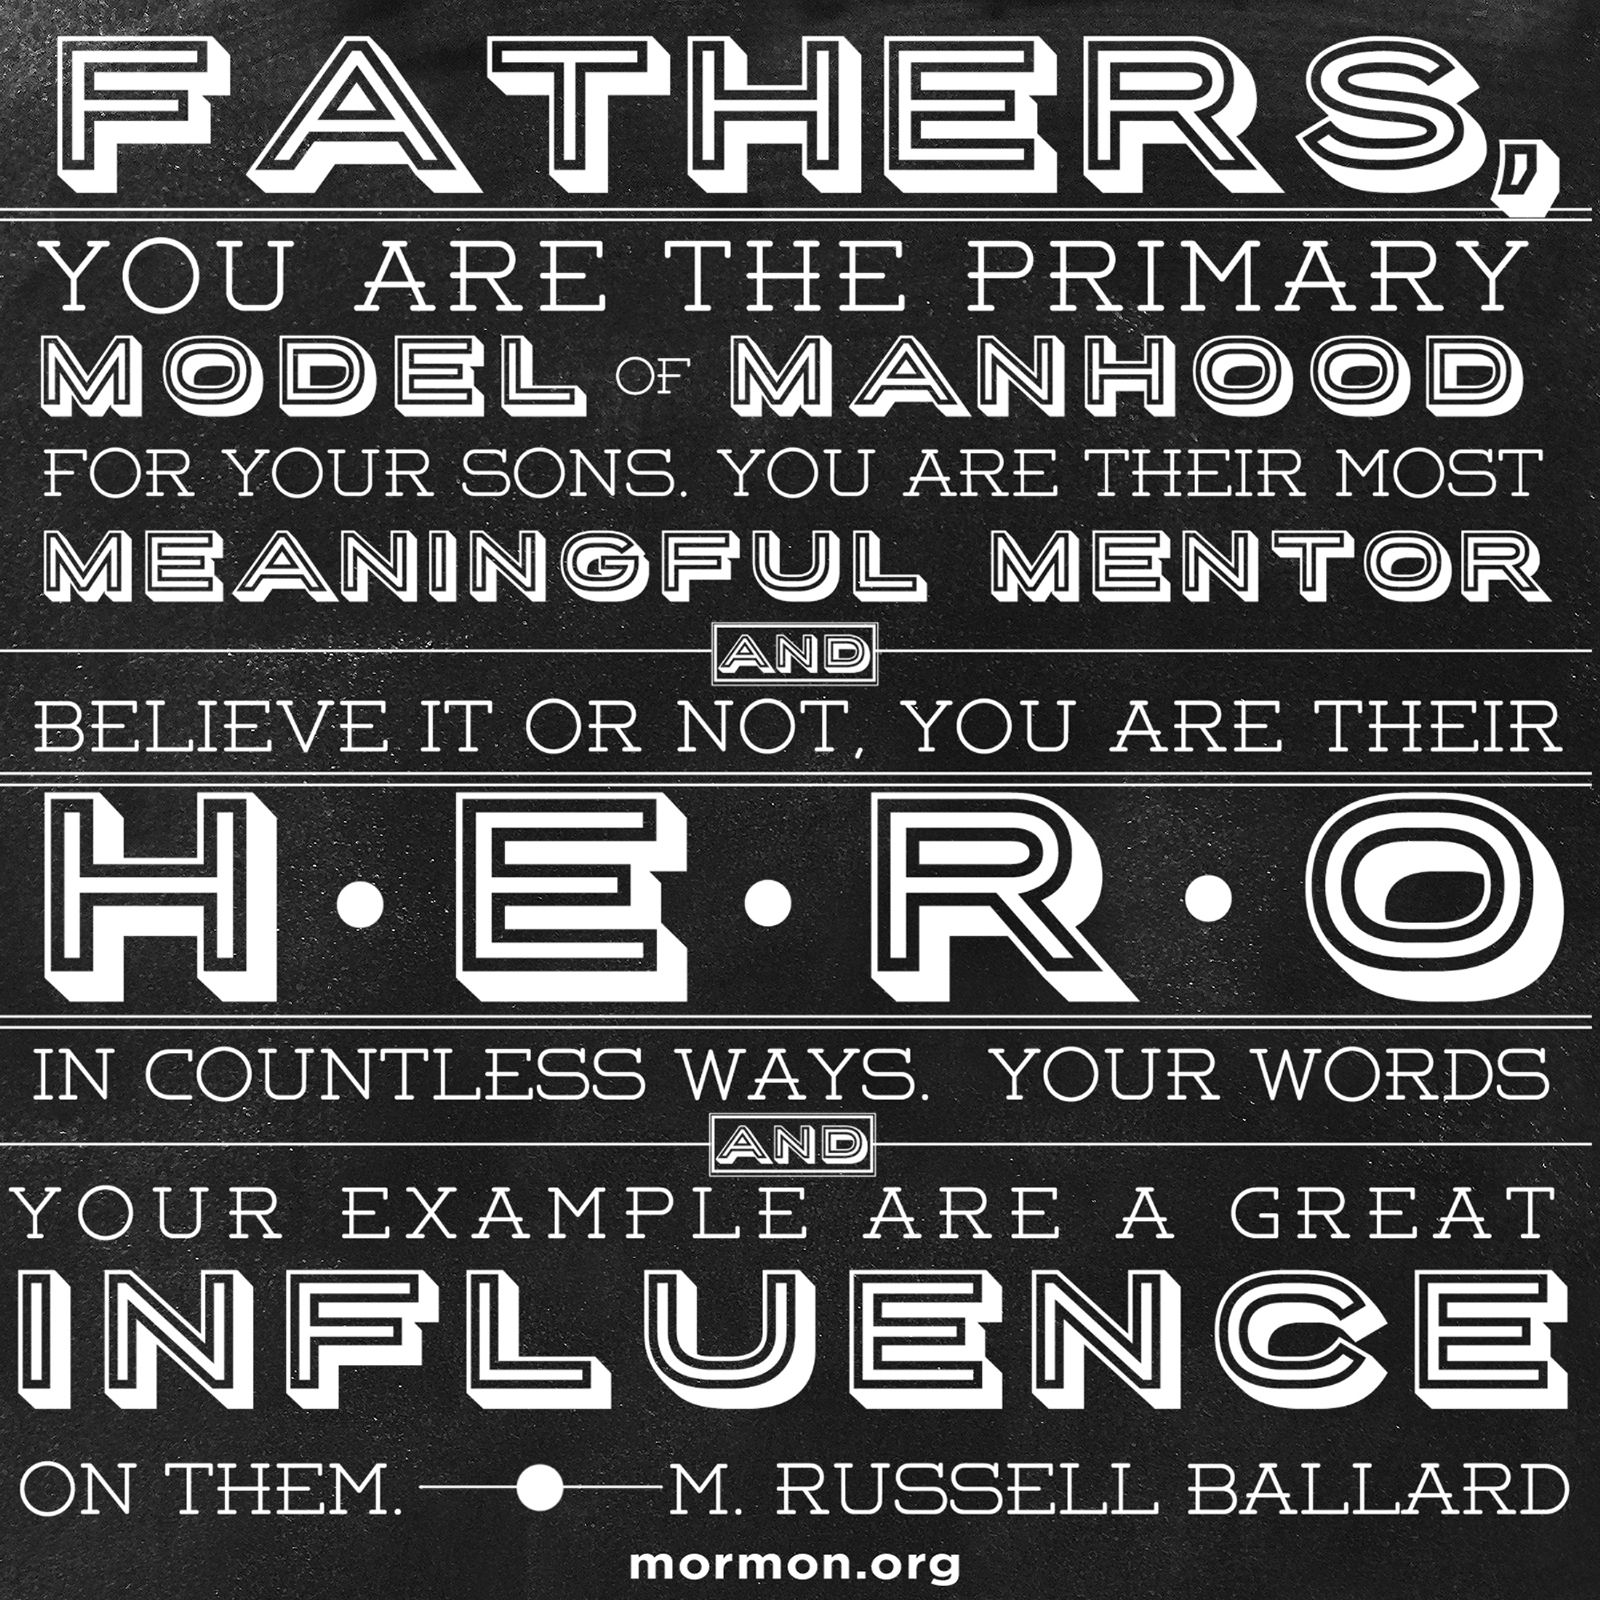 “Fathers, you are the primary model of manhood for your sons. You are their most meaningful mentor, and believe it or not, you are their hero in countless ways. Your words and your example are a great influence on them.”—Elder M. Russell Ballard, “Fathers and Sons: A Remarkable Relationship”